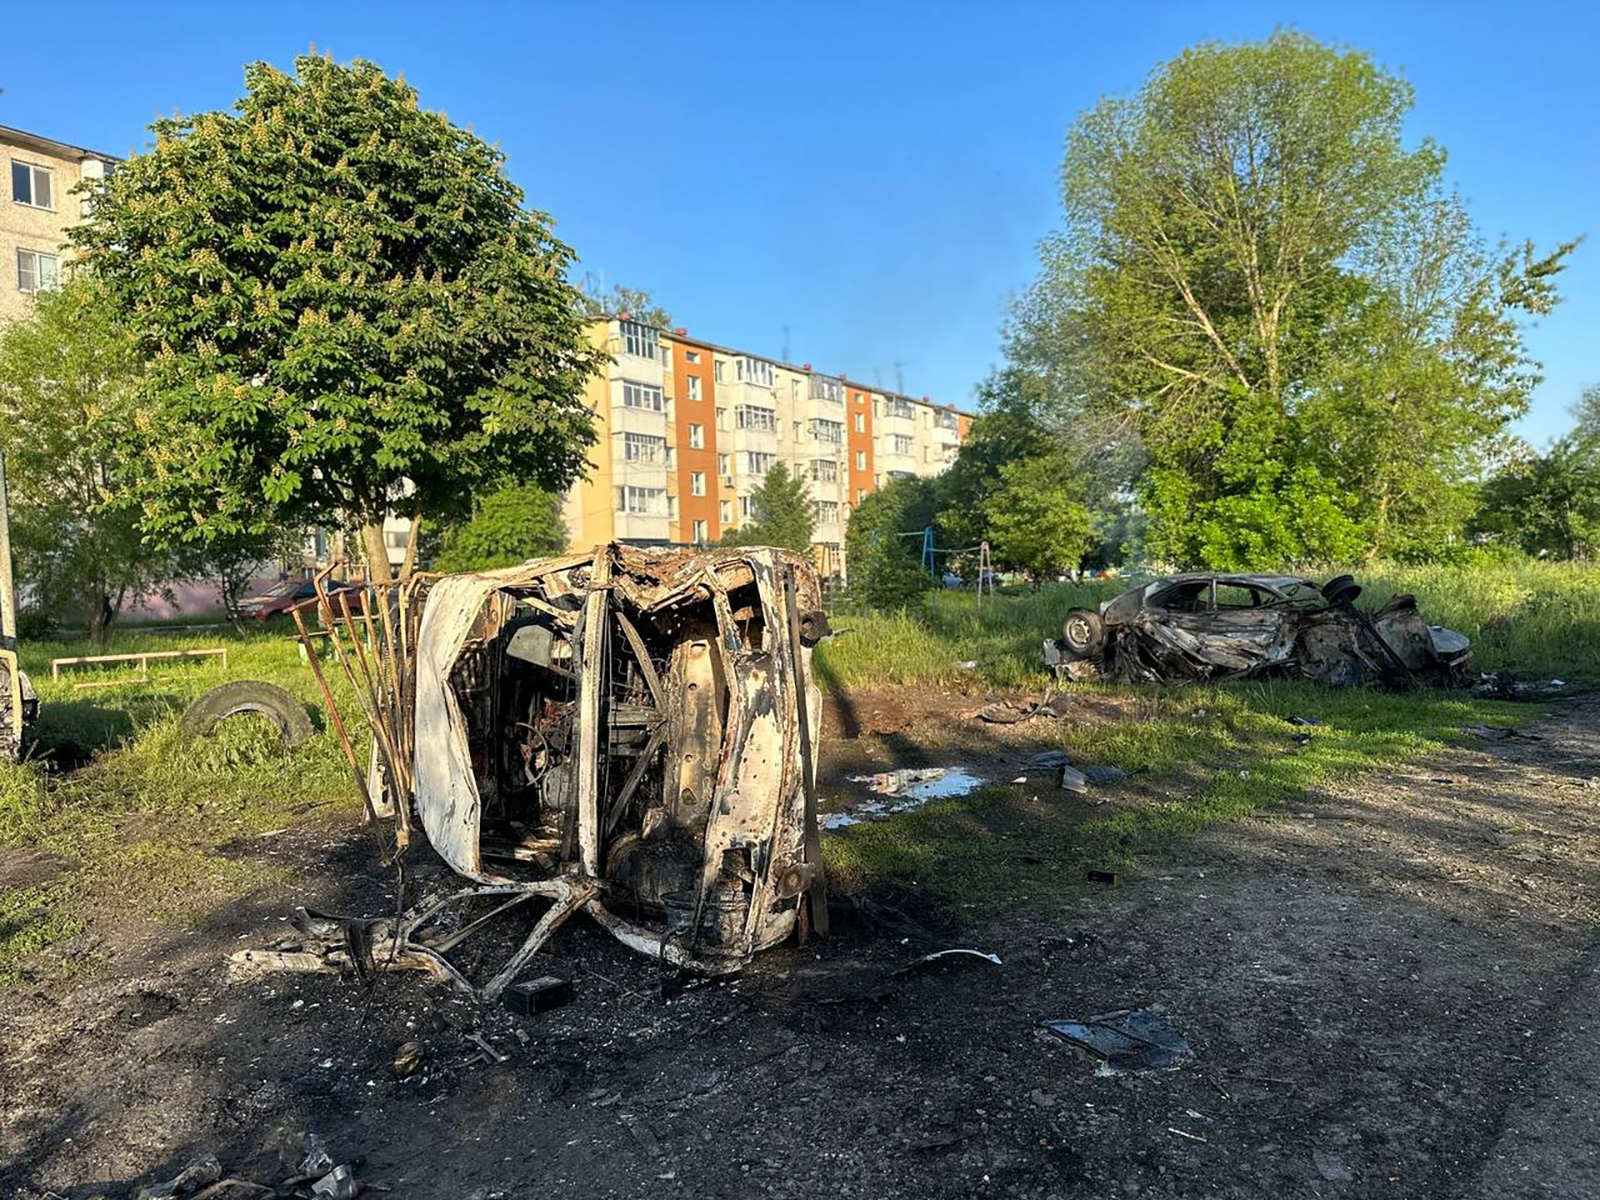 This picture shows the aftermath of a strike overnight in Belgorod region, Russia on May 31.